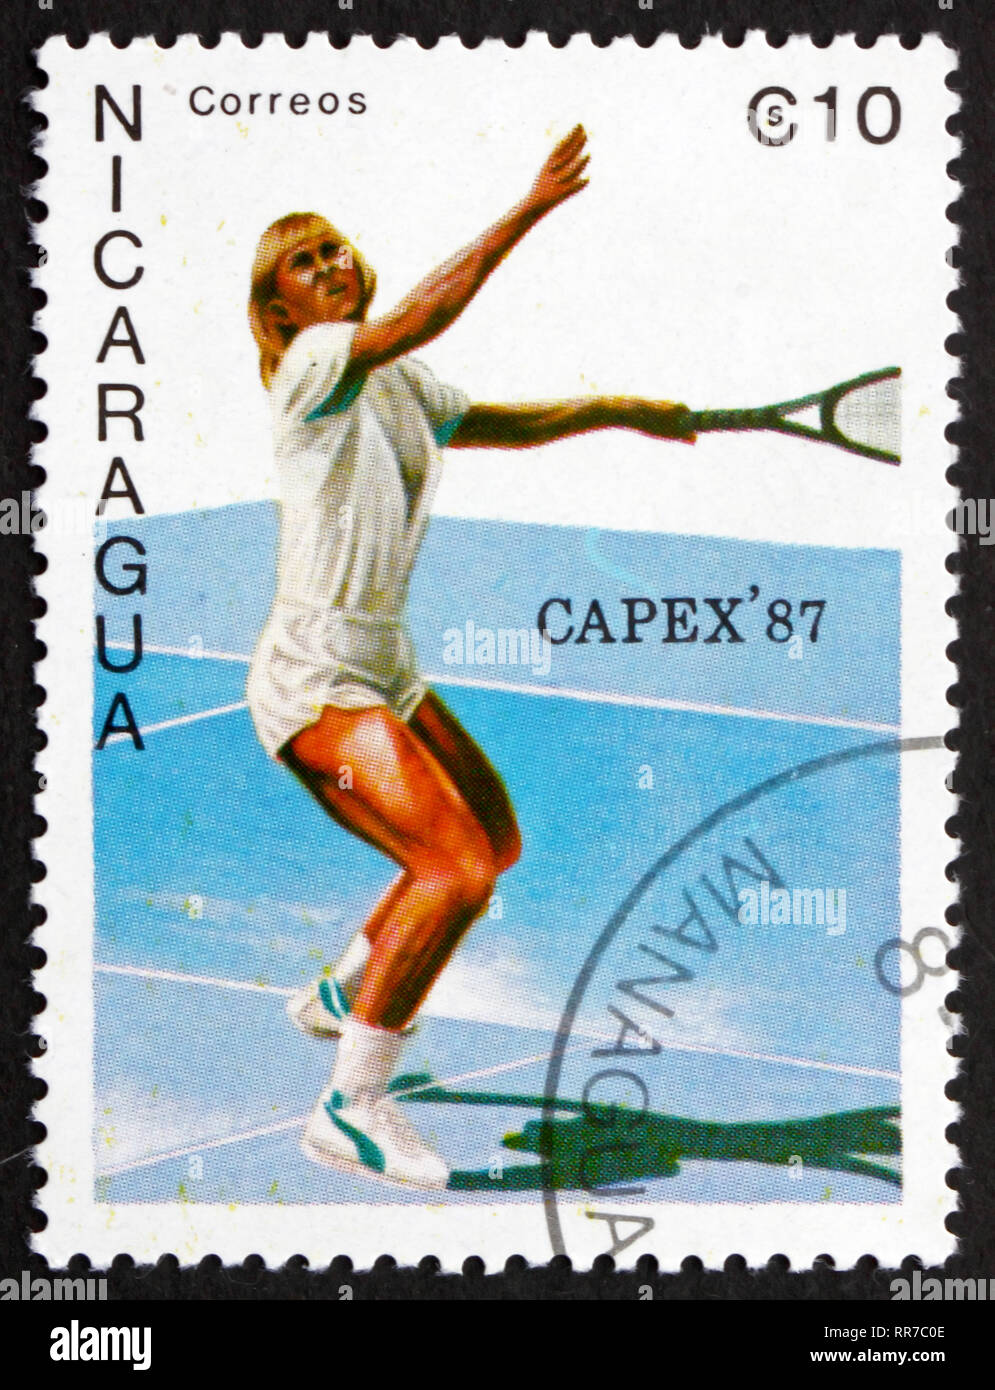 NICARAGUA - CIRCA 1987: a stamp printed in Nicaragua shows Female Tennis Player in Action, circa 1987 Stock Photo